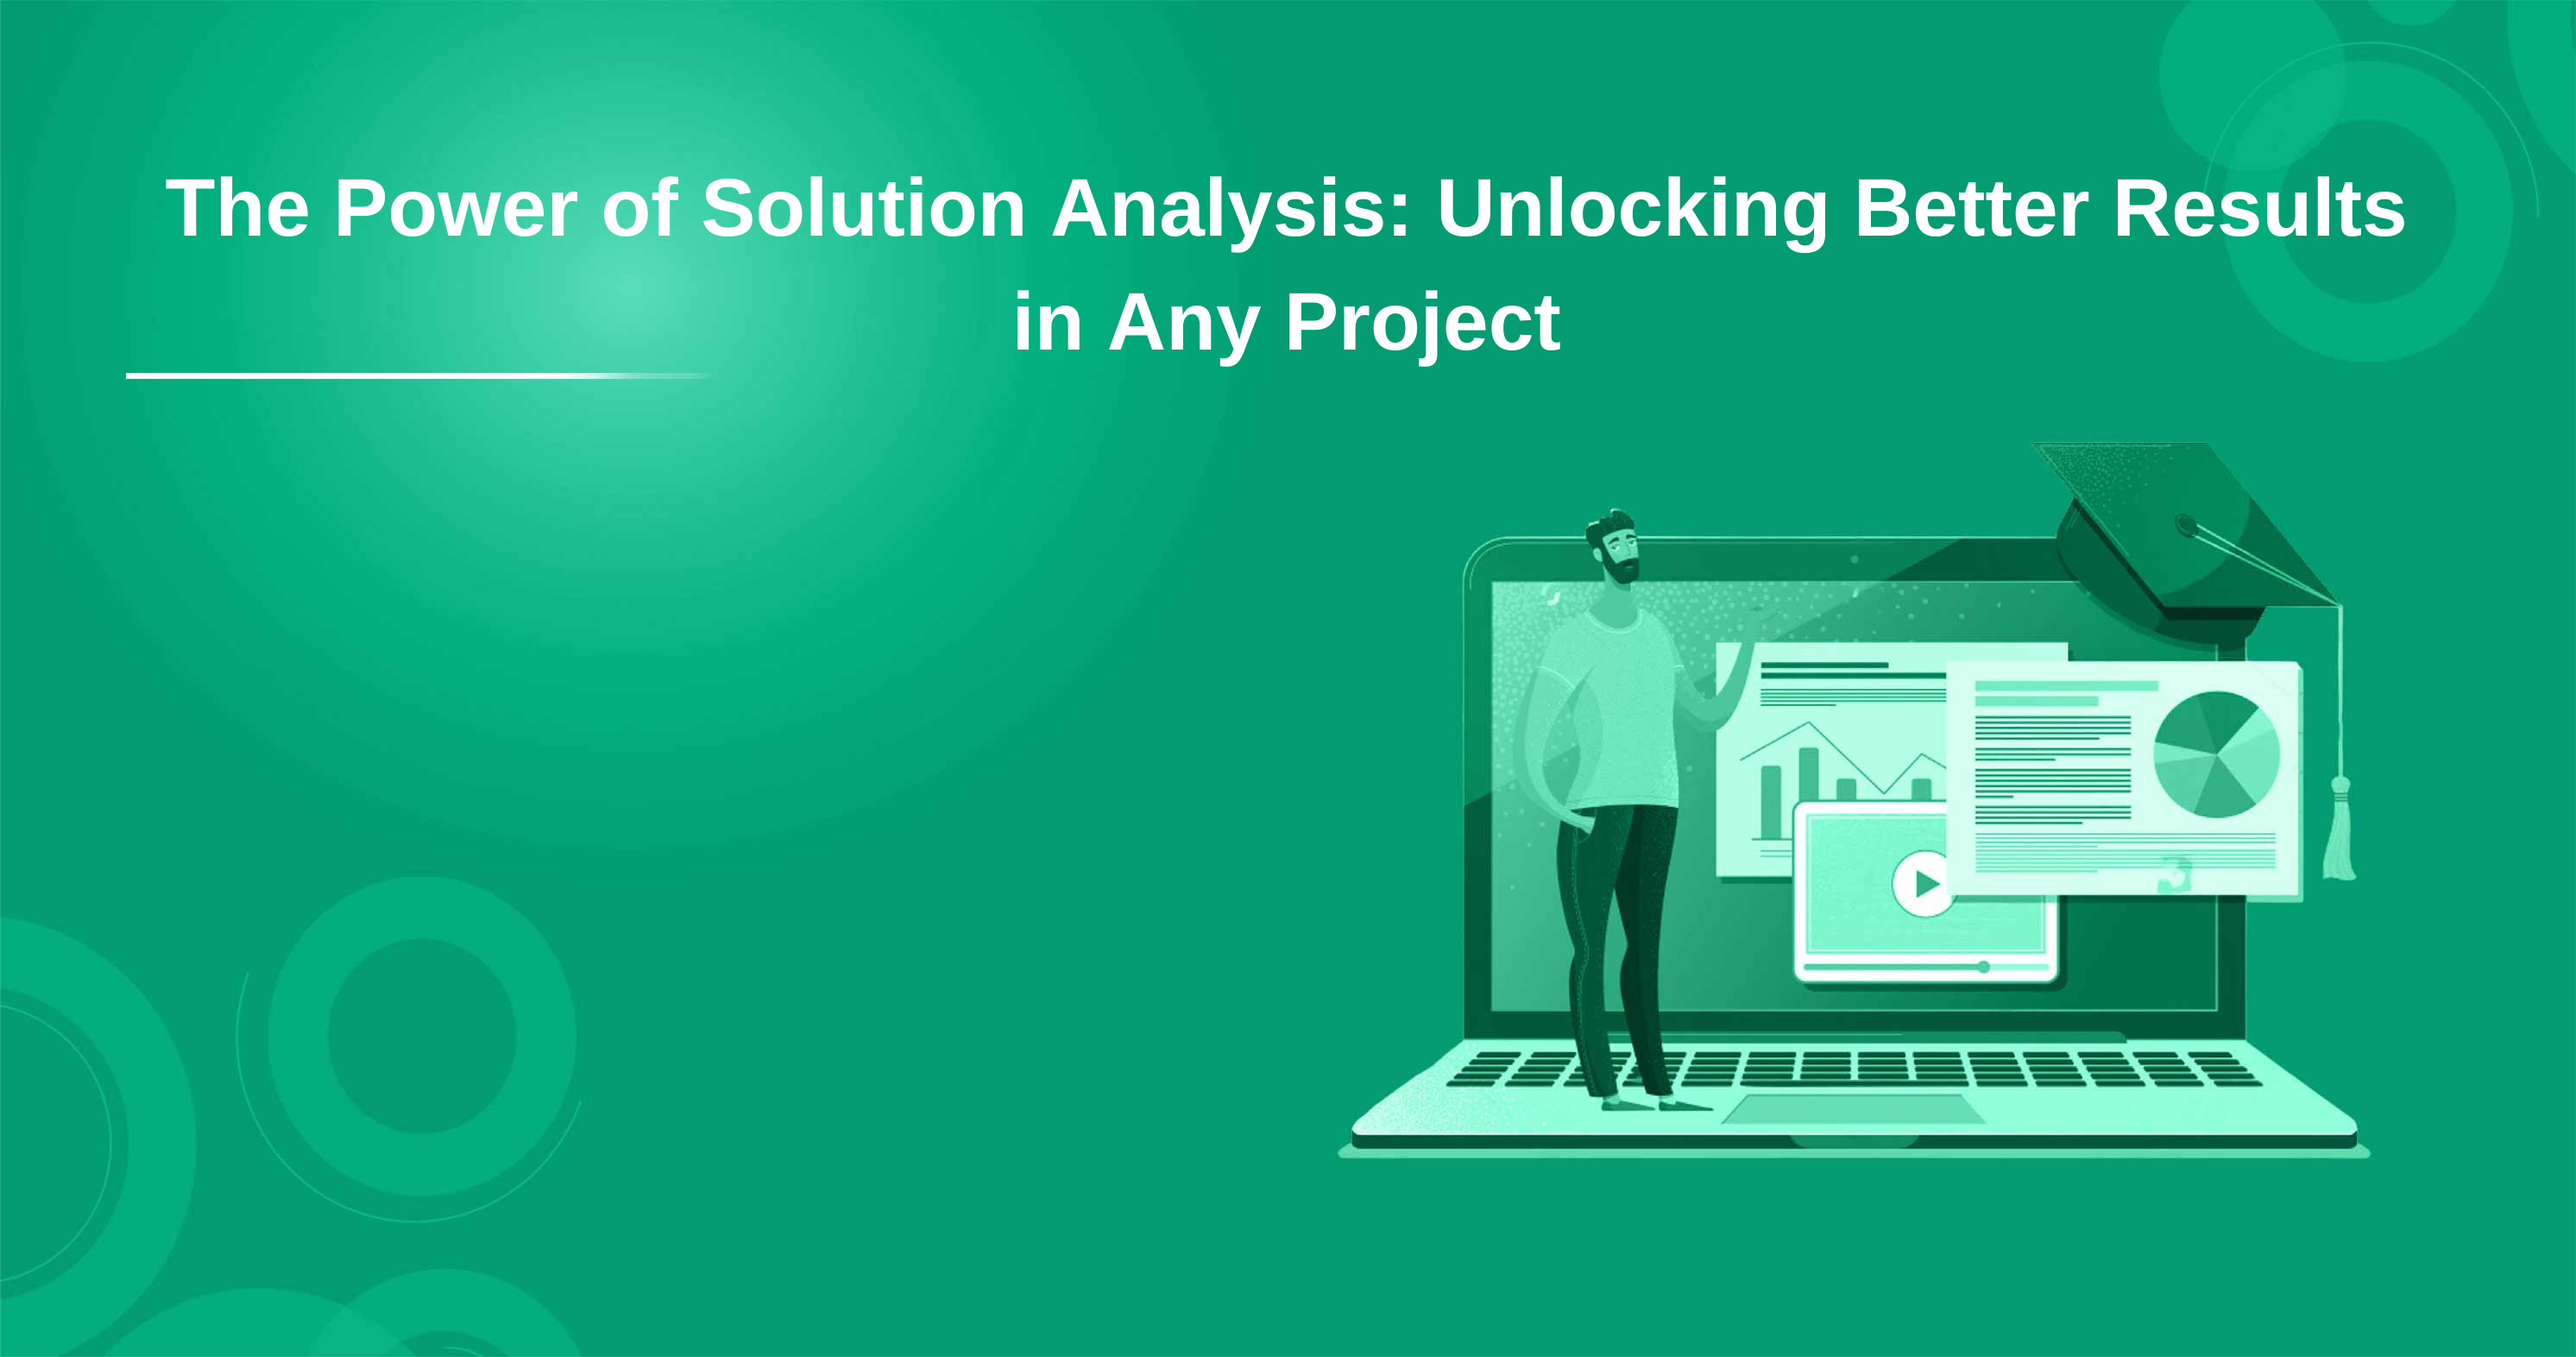 The Power of Solution Analysis: Unlocking Better Results in Any Project